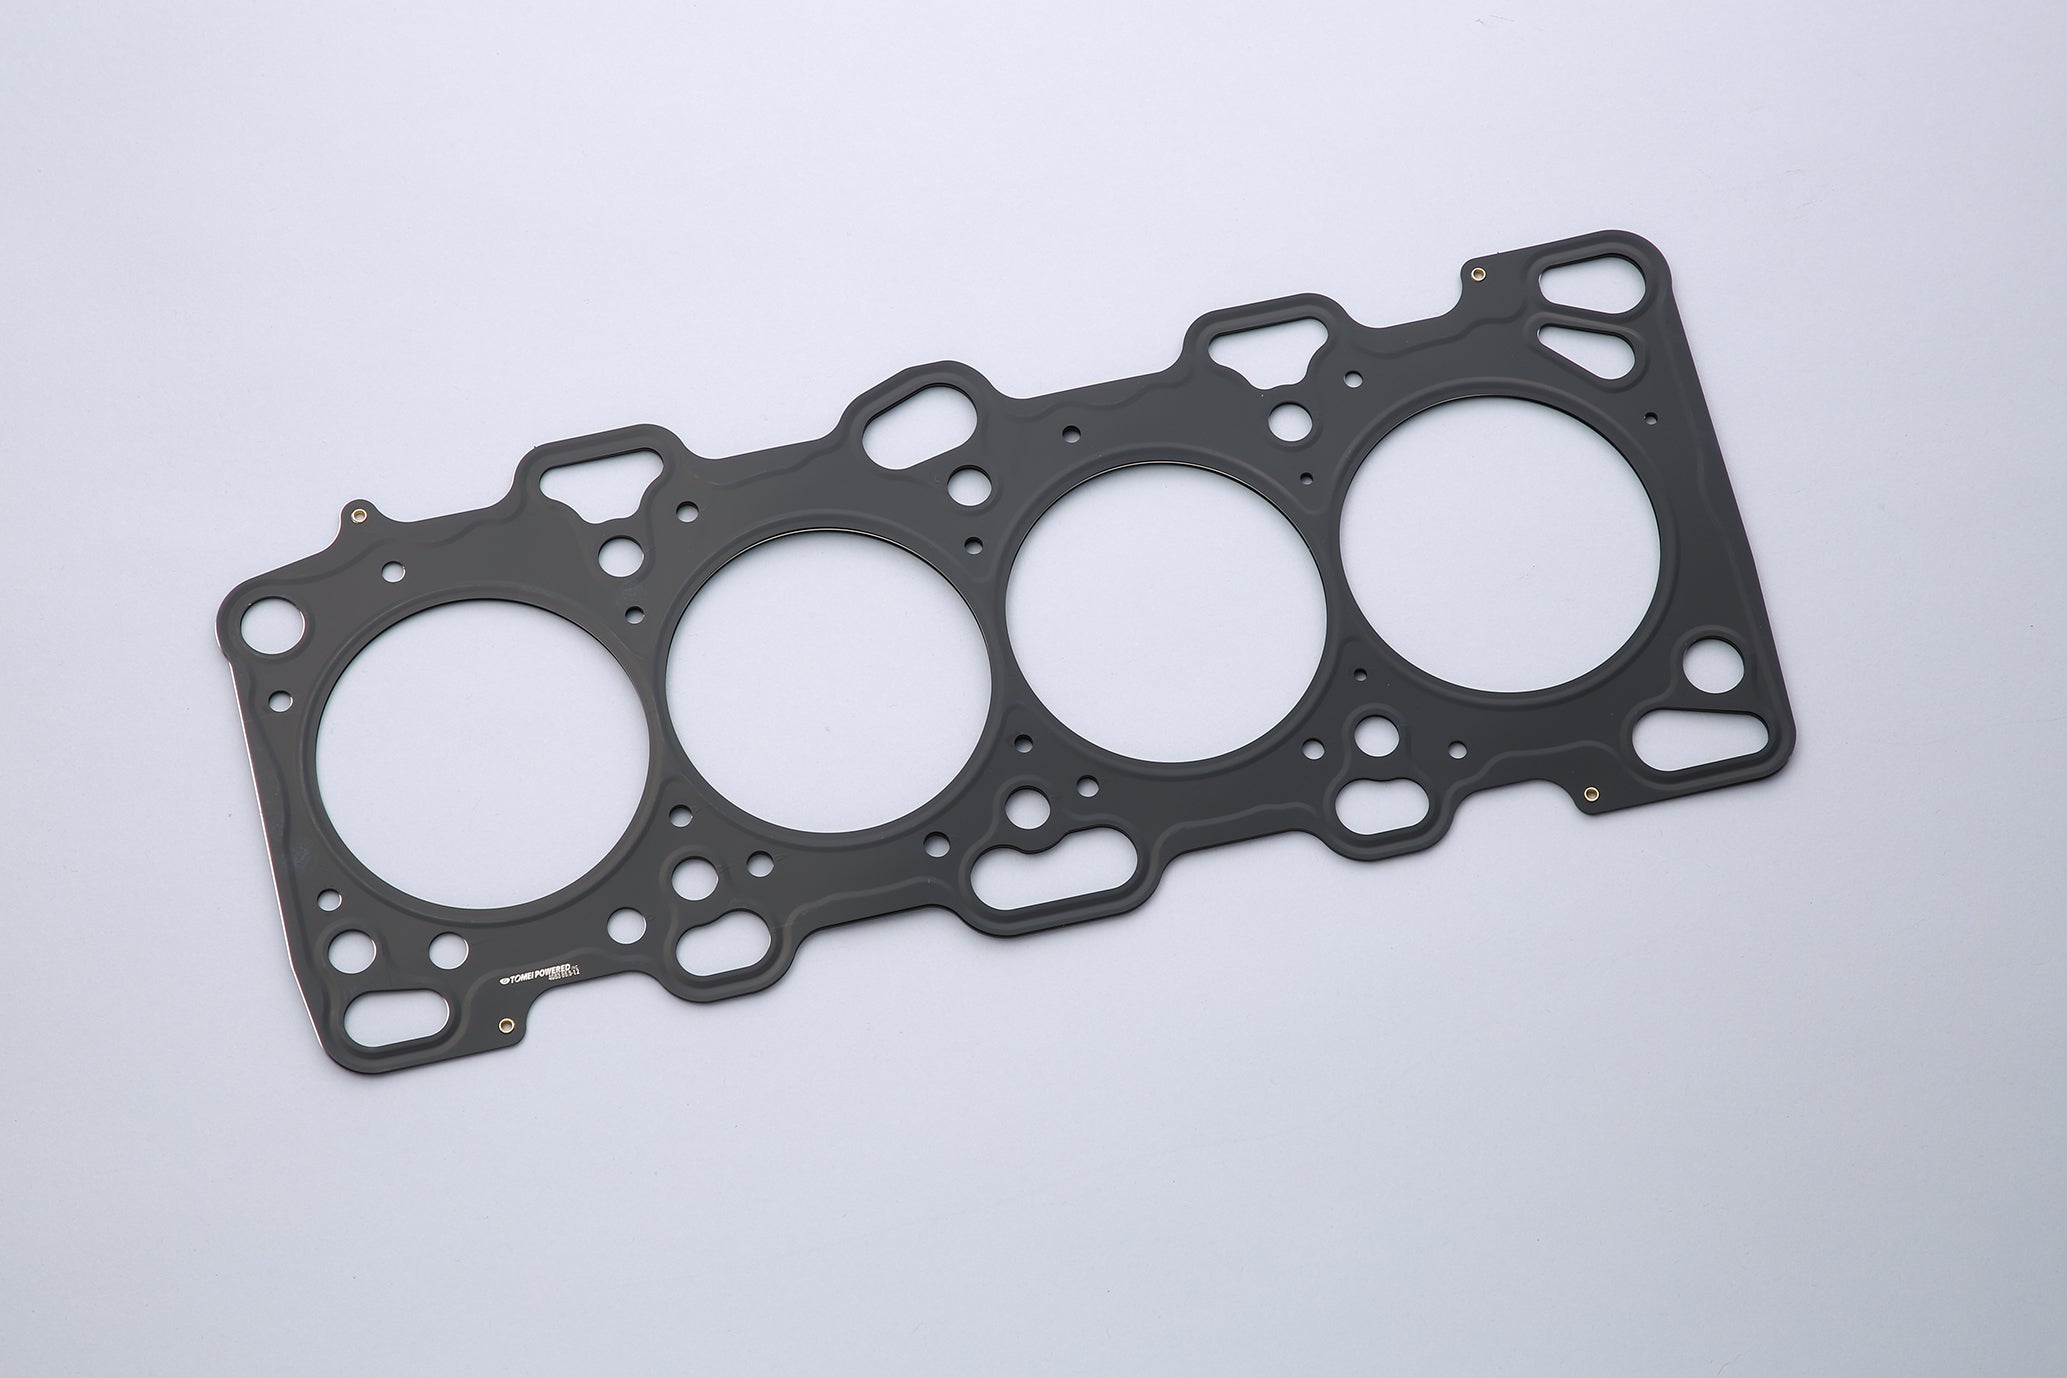 4G63 (EVO IV) Engine Rebuild Package - CP Pistons, Manley Rods & Tomei 1.2mm Head Gasket - 8.5:1 CR